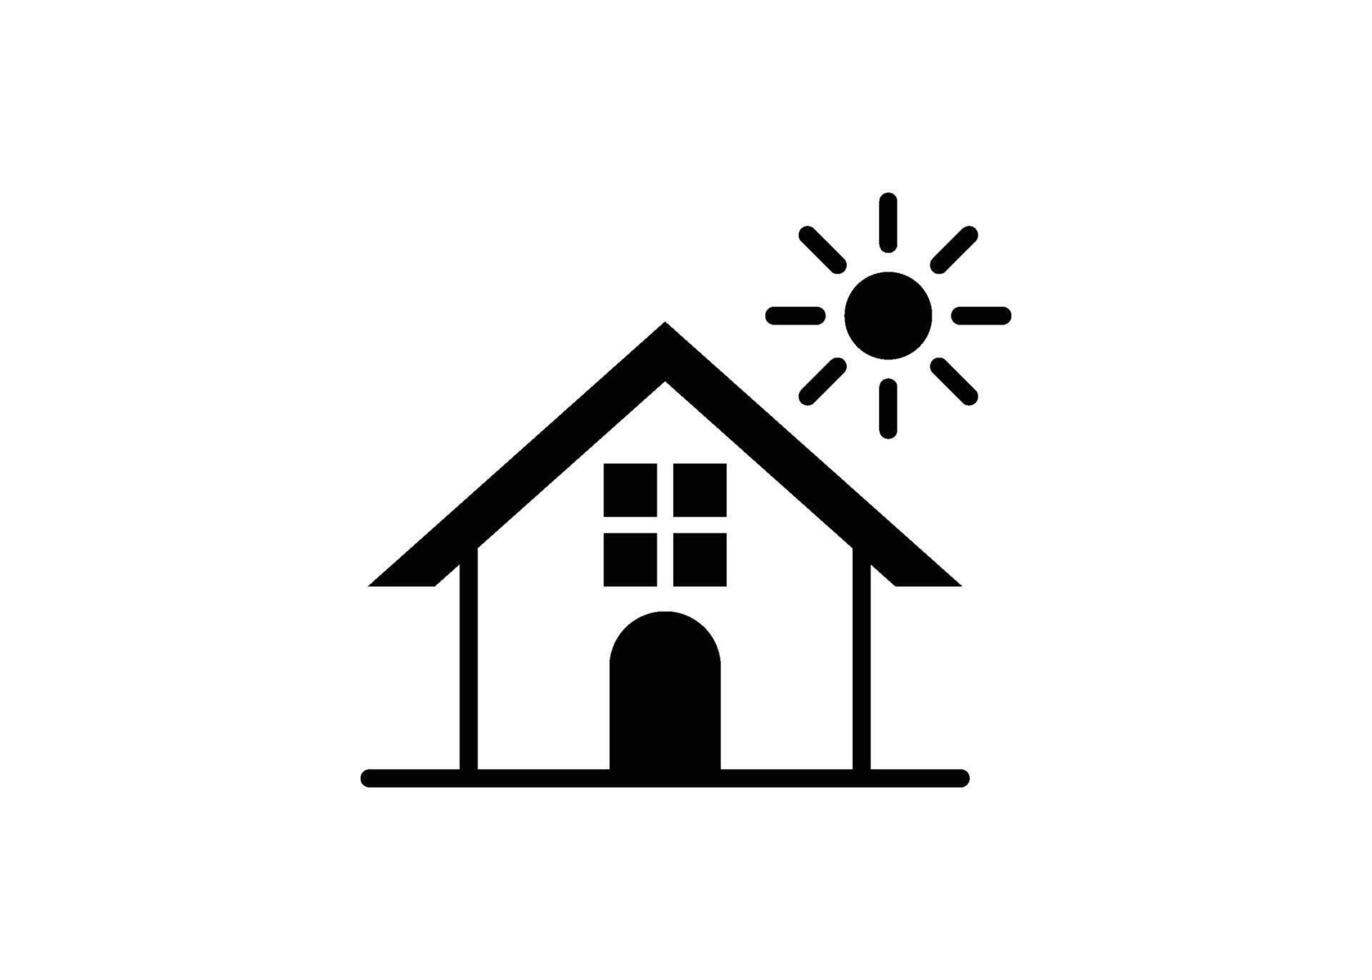 Home icon design template isolated illustration vector